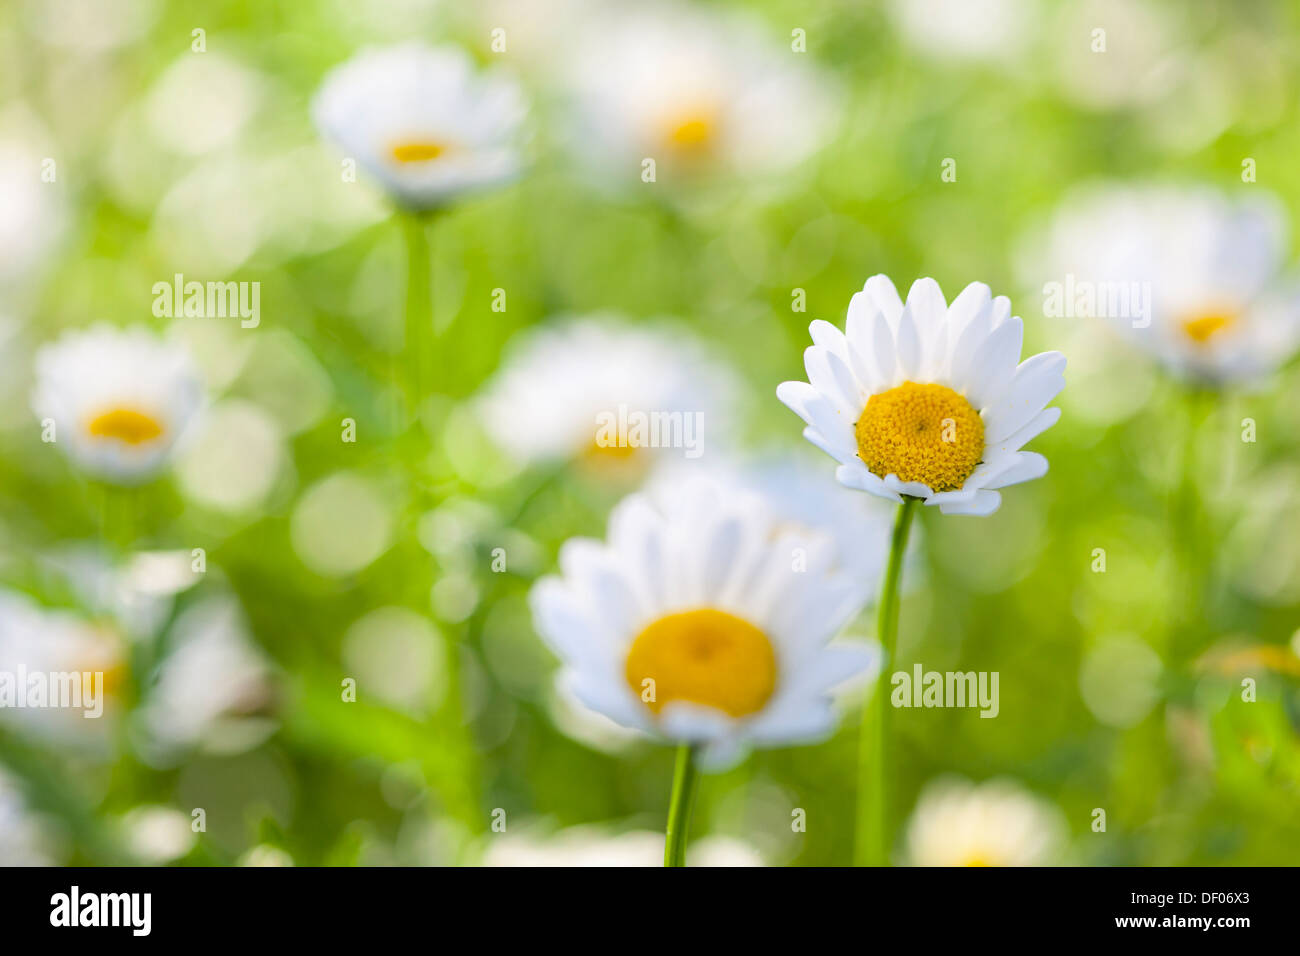 Close-up of a daisy in a field of flowers with very shallow depth of field. Stock Photo